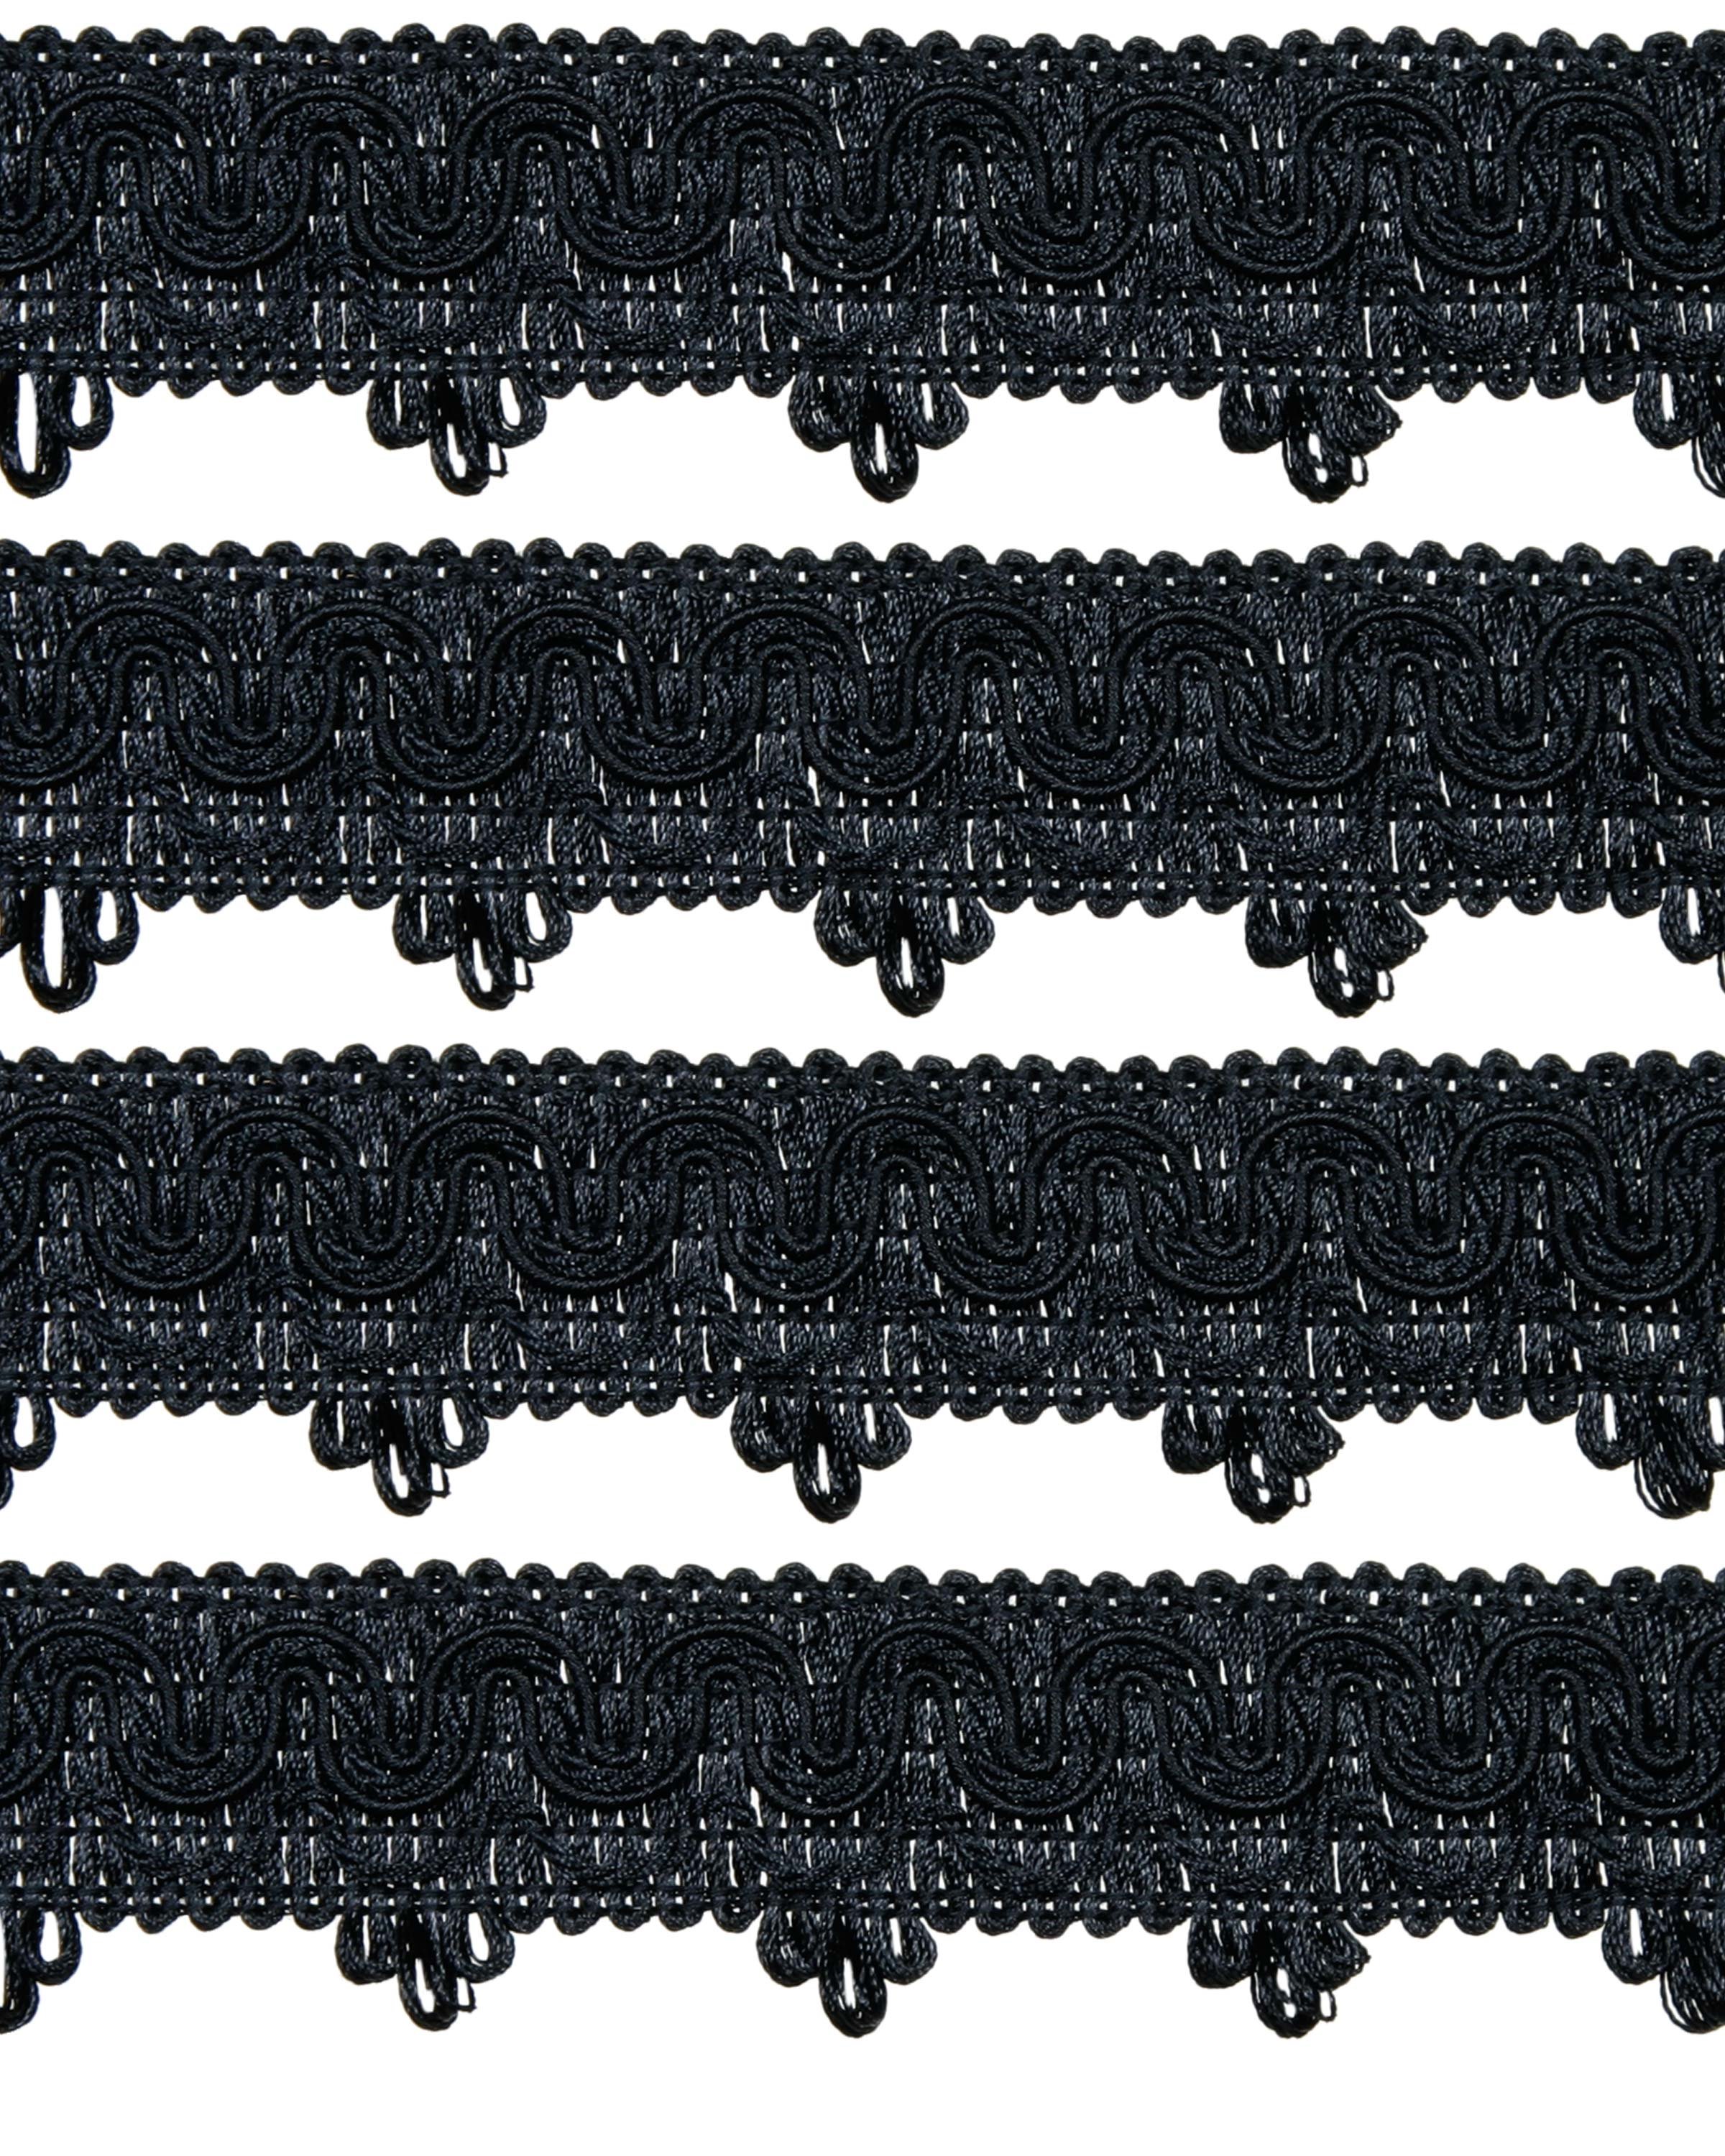 Ornate Scalloped Braid - Black 45mm Price is for 5 metres